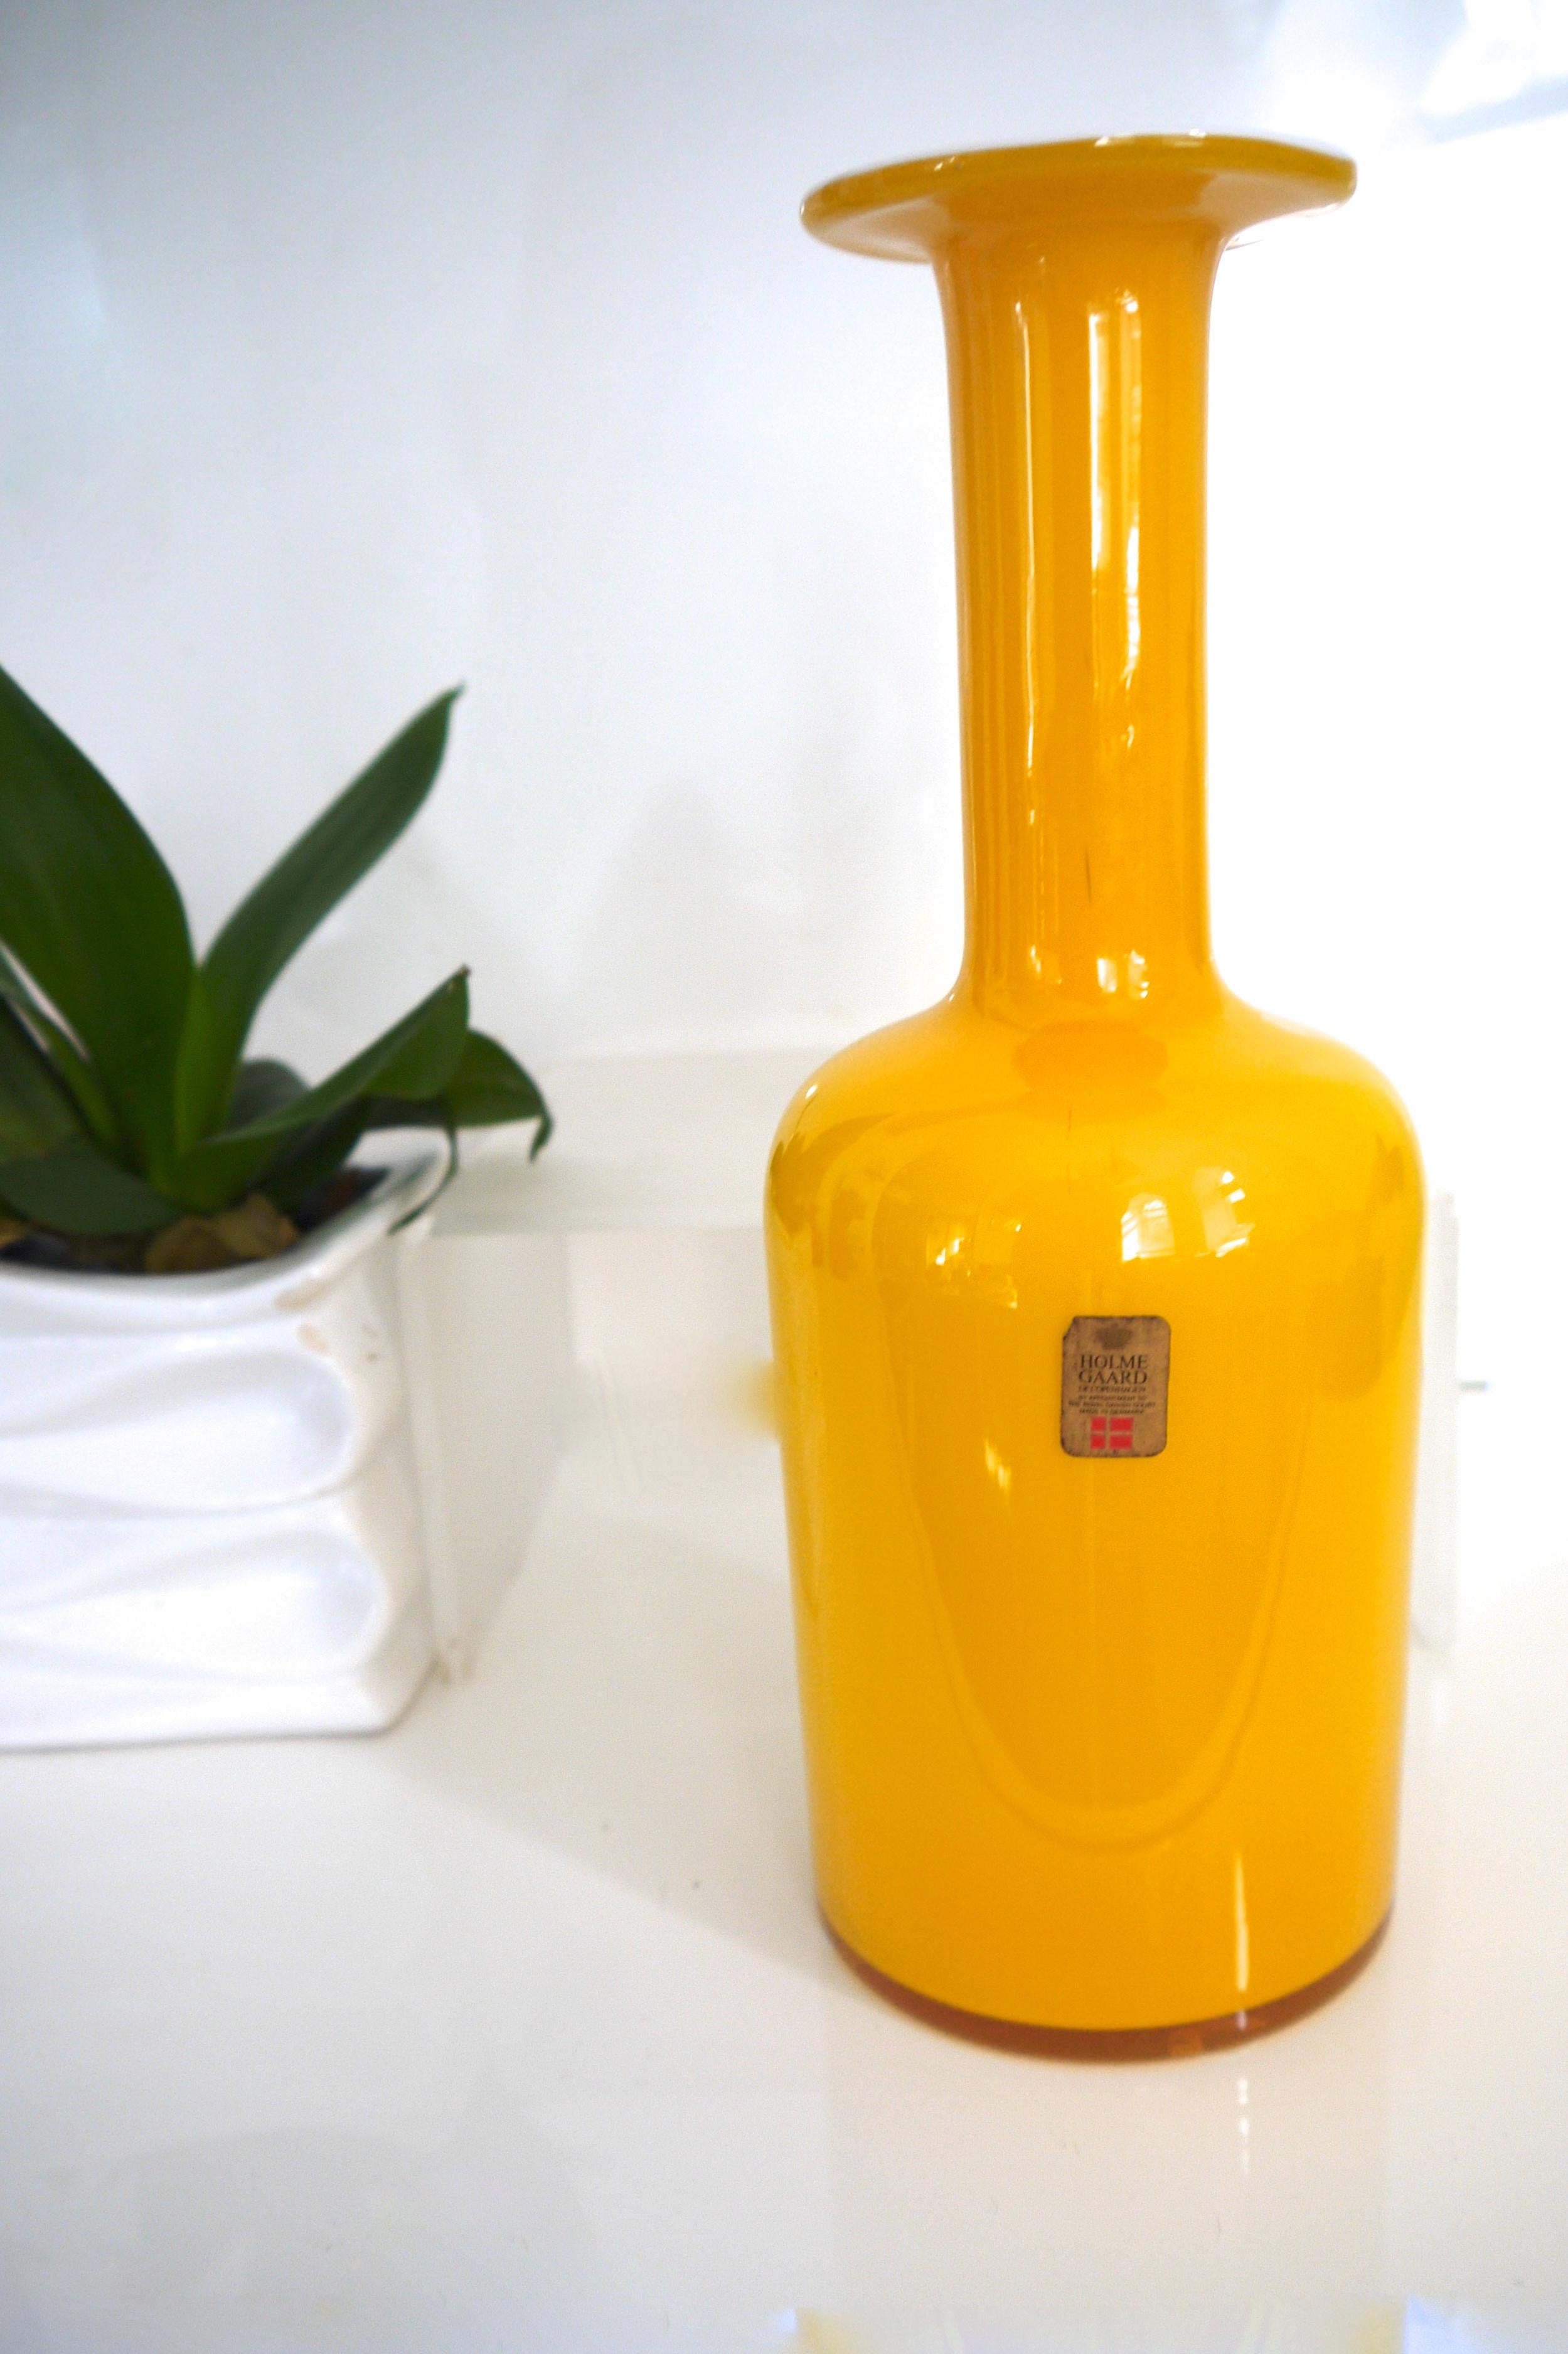 Modernist Holmegaard yellow glass Gulvvase with inner white casing, designed by Otto Brauer in 1962, based on a 1958 design by Per Lutken. The Carnaby collection reflected the color explosion and graphic design of the Pop Art period.